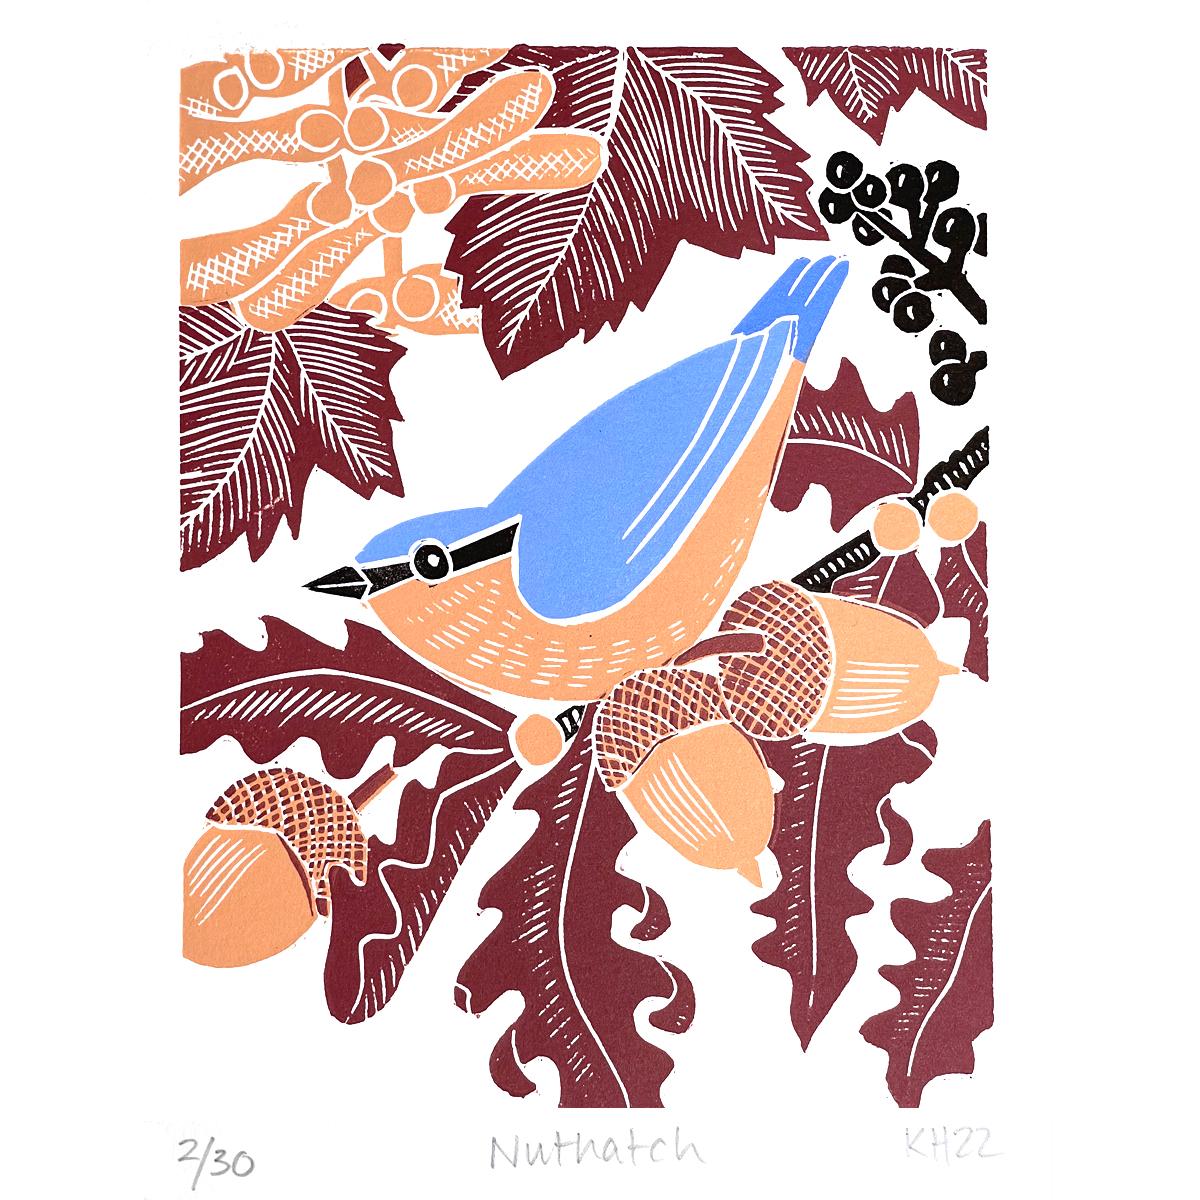 Nuthatch by Kate Heiss [2022]
limited_edition
Oil based inks on 300gsm Somerset velvet Paper
Edition number 30
Image size: H:20 cm x W:15 cm
Complete Size of Unframed Work: H:30 cm x W:25 cm x D:1cm
Sold Unframed
Please note that insitu images are